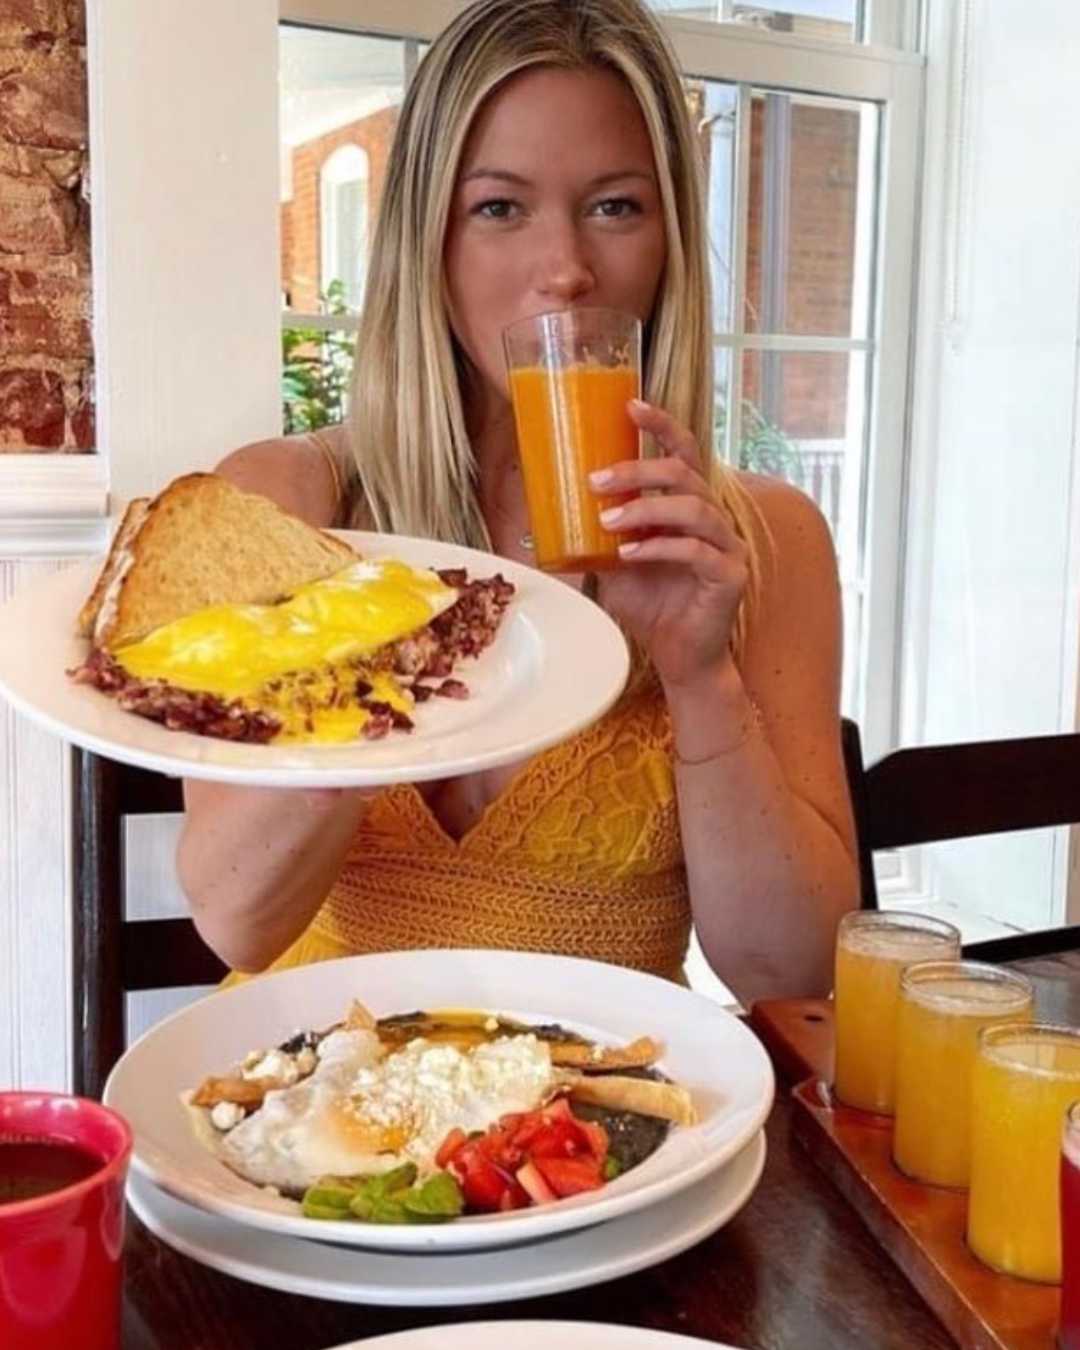 A woman is holding a plate of food and drinking orange juice